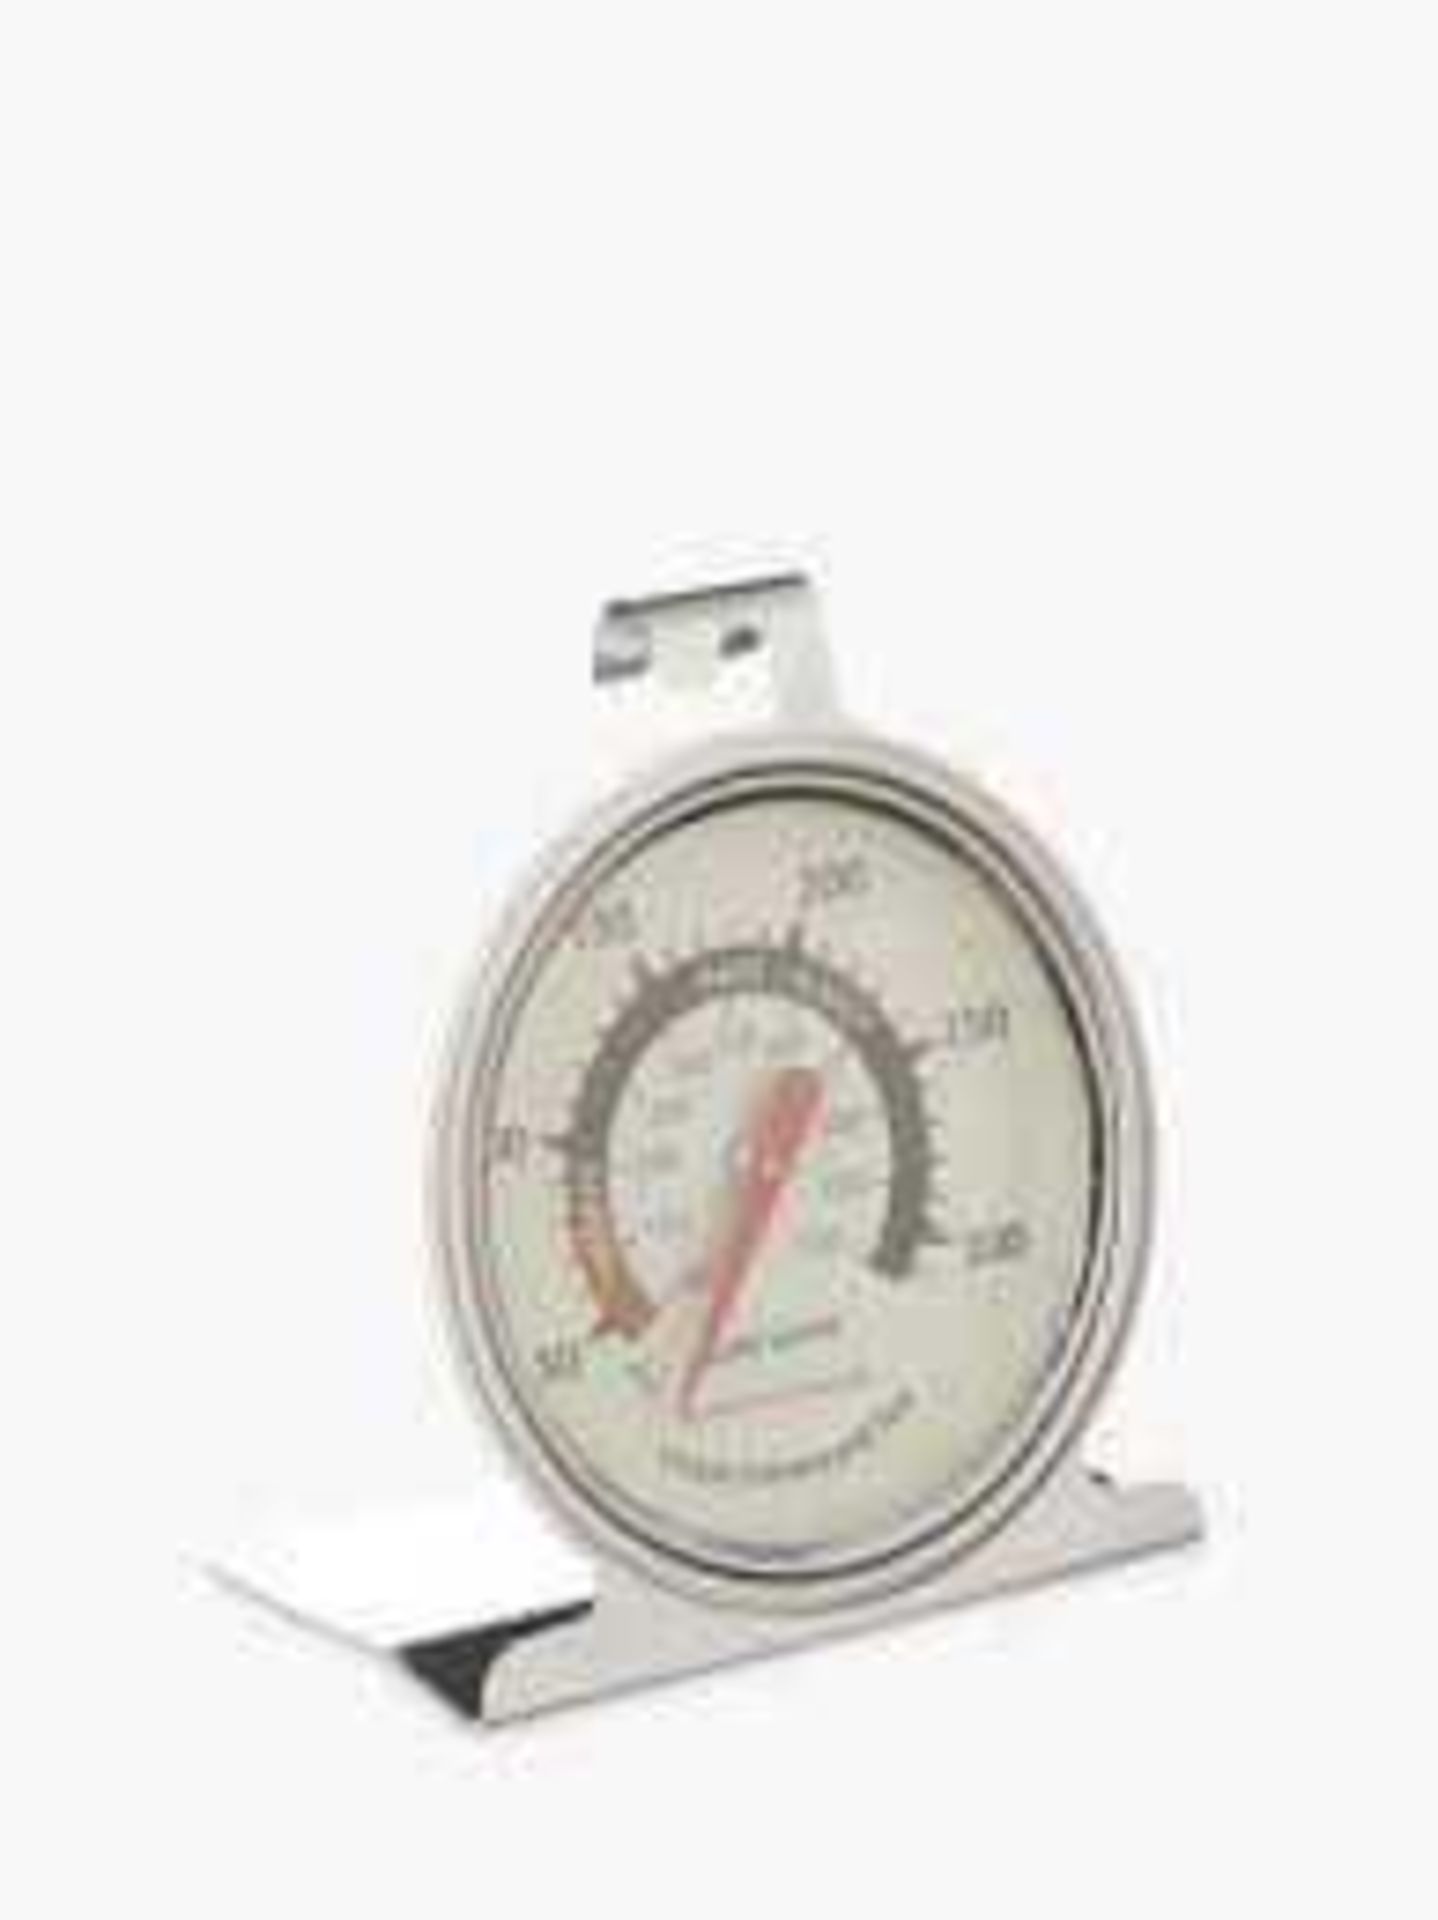 RRP £360 Box To Contain 36 Brand New John Lewis Meat Thermometers